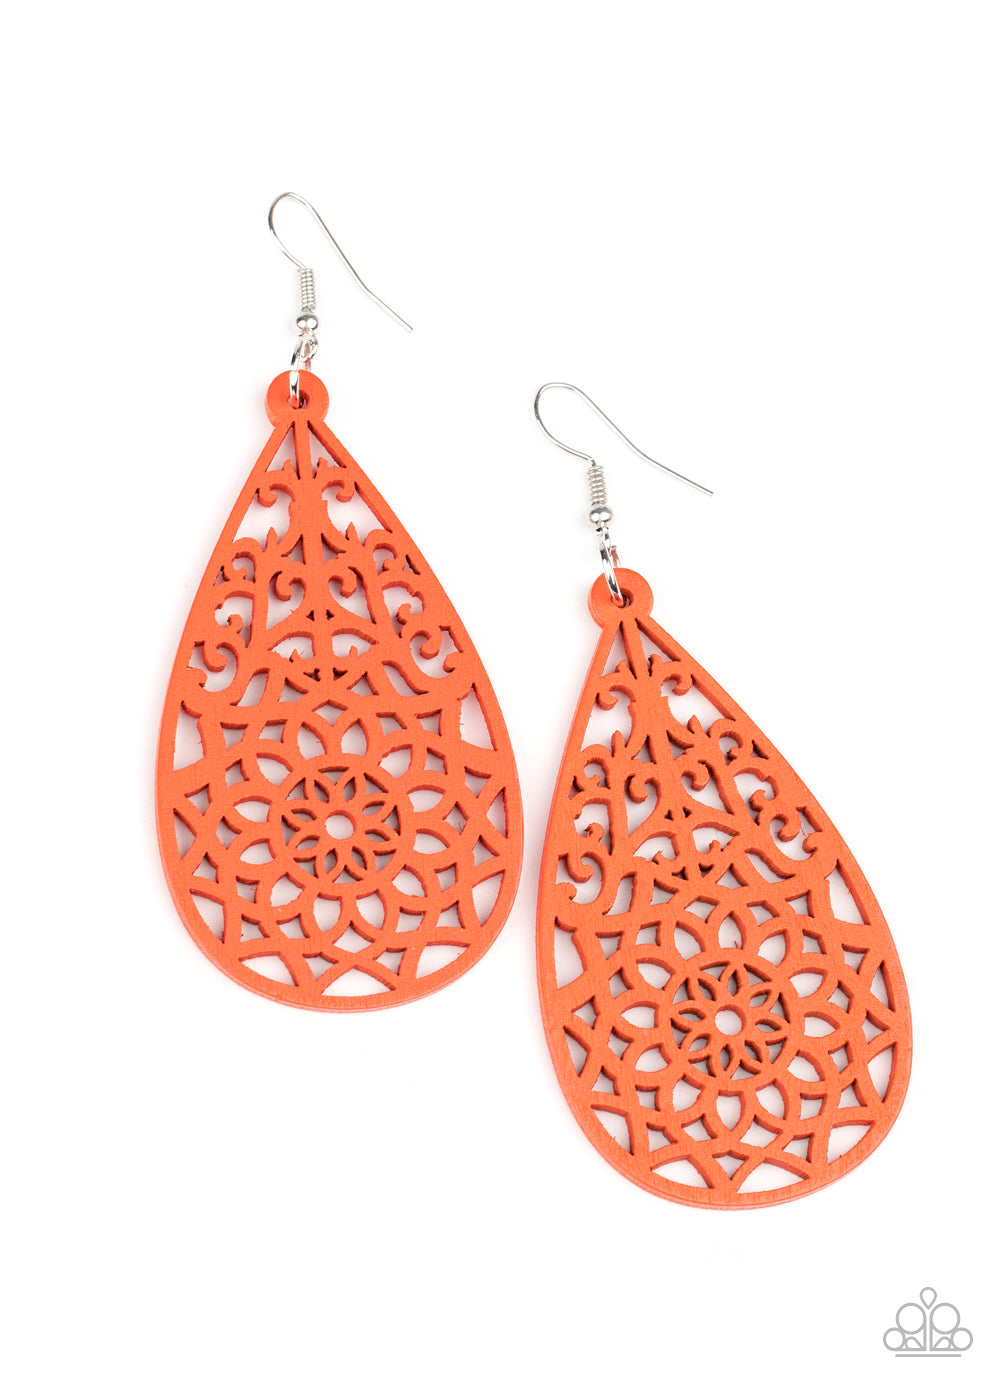 &lt;P&gt;A refreshing Amberglow wooden teardrop is cut into a stenciled floral pattern, creating a whimsical lure. Earring attaches to a standard fishhook fitting.&lt;/P&gt;  

&lt;P&gt; &lt;I&gt;  Sold as one pair of earrings. &lt;/I&gt;  &lt;/P&gt;


&lt;img src=\&quot;https://d9b54x484lq62.cloudfront.net/paparazzi/shopping/images/517_tag150x115_1.png\&quot; alt=\&quot;New Kit\&quot; align=\&quot;middle\&quot; height=\&quot;50\&quot; width=\&quot;50\&quot;/&gt;